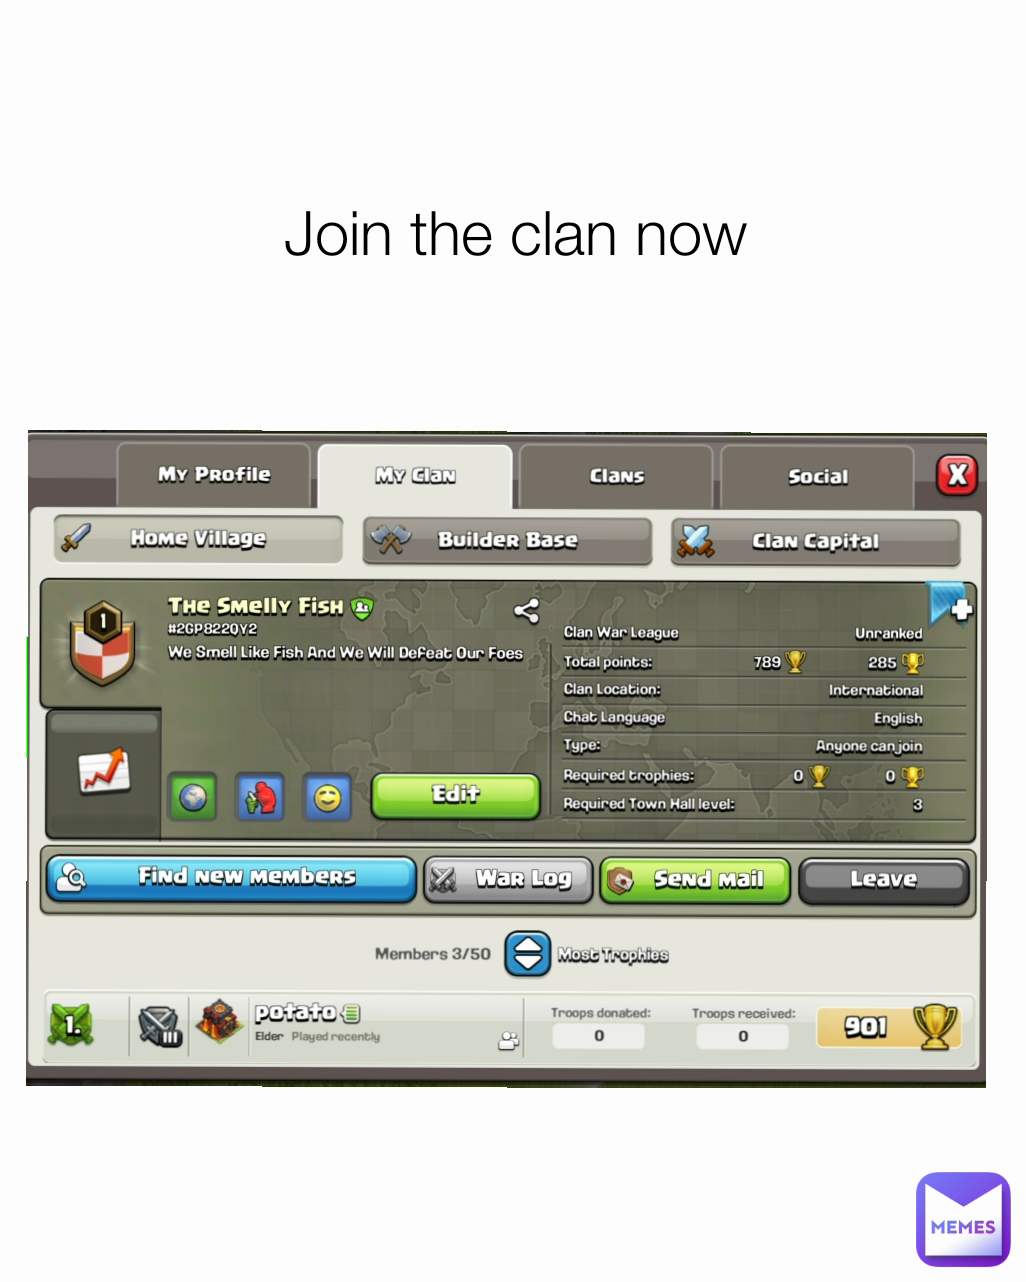 Join the clan now